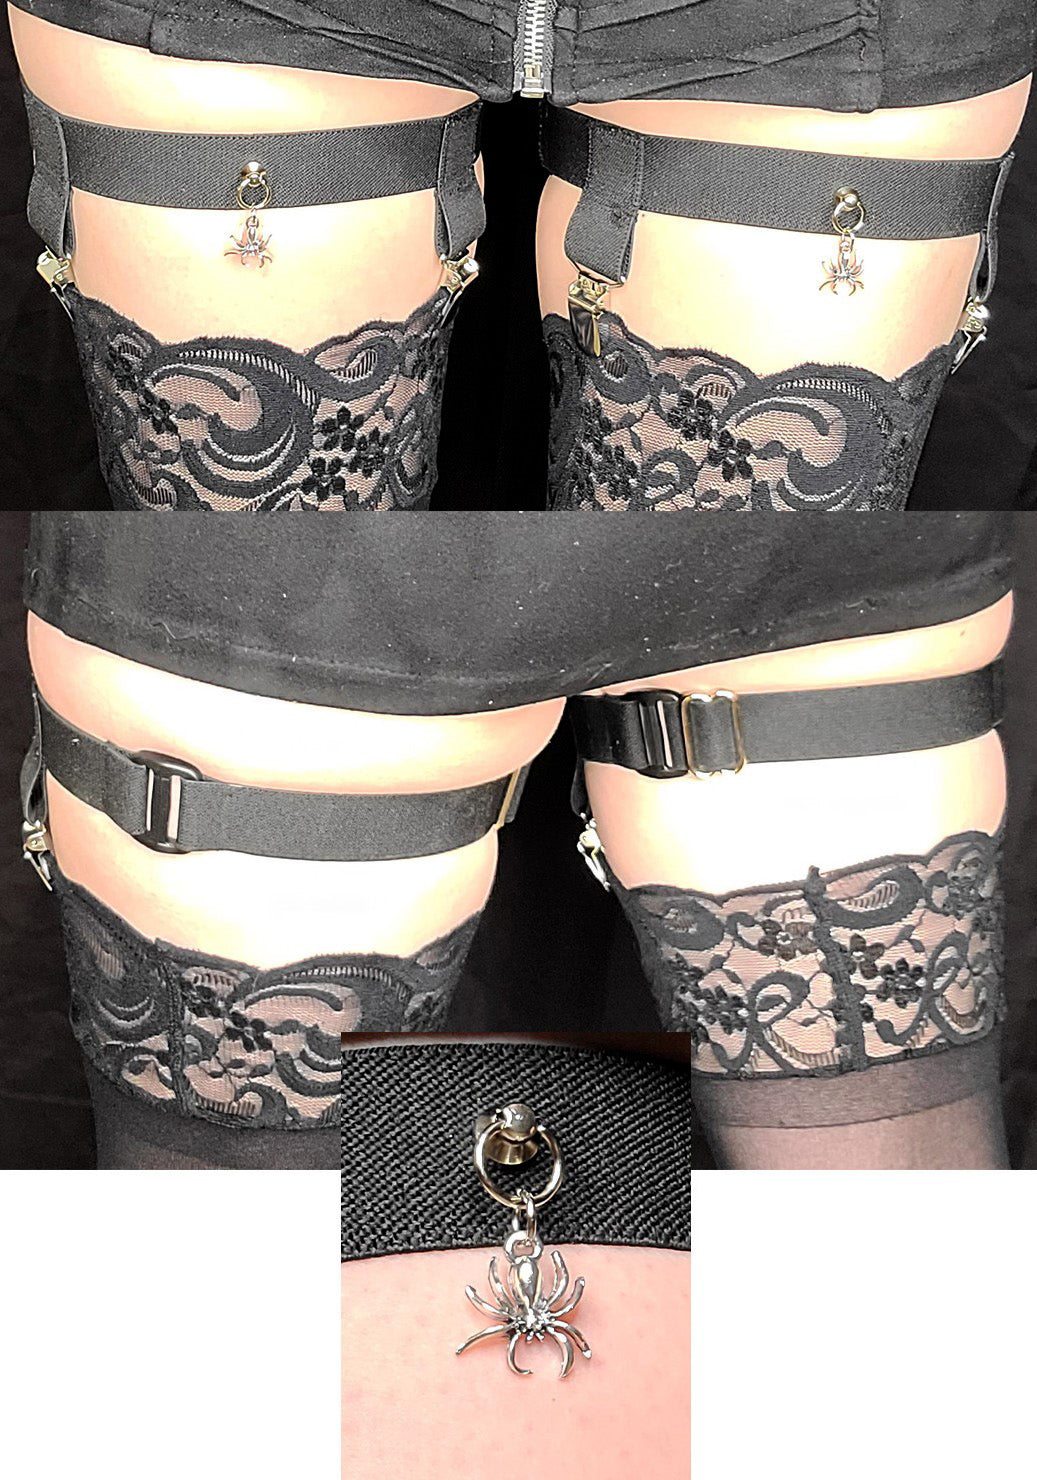 2-Clip Garters with 1 Leg Strap and Spider Charm